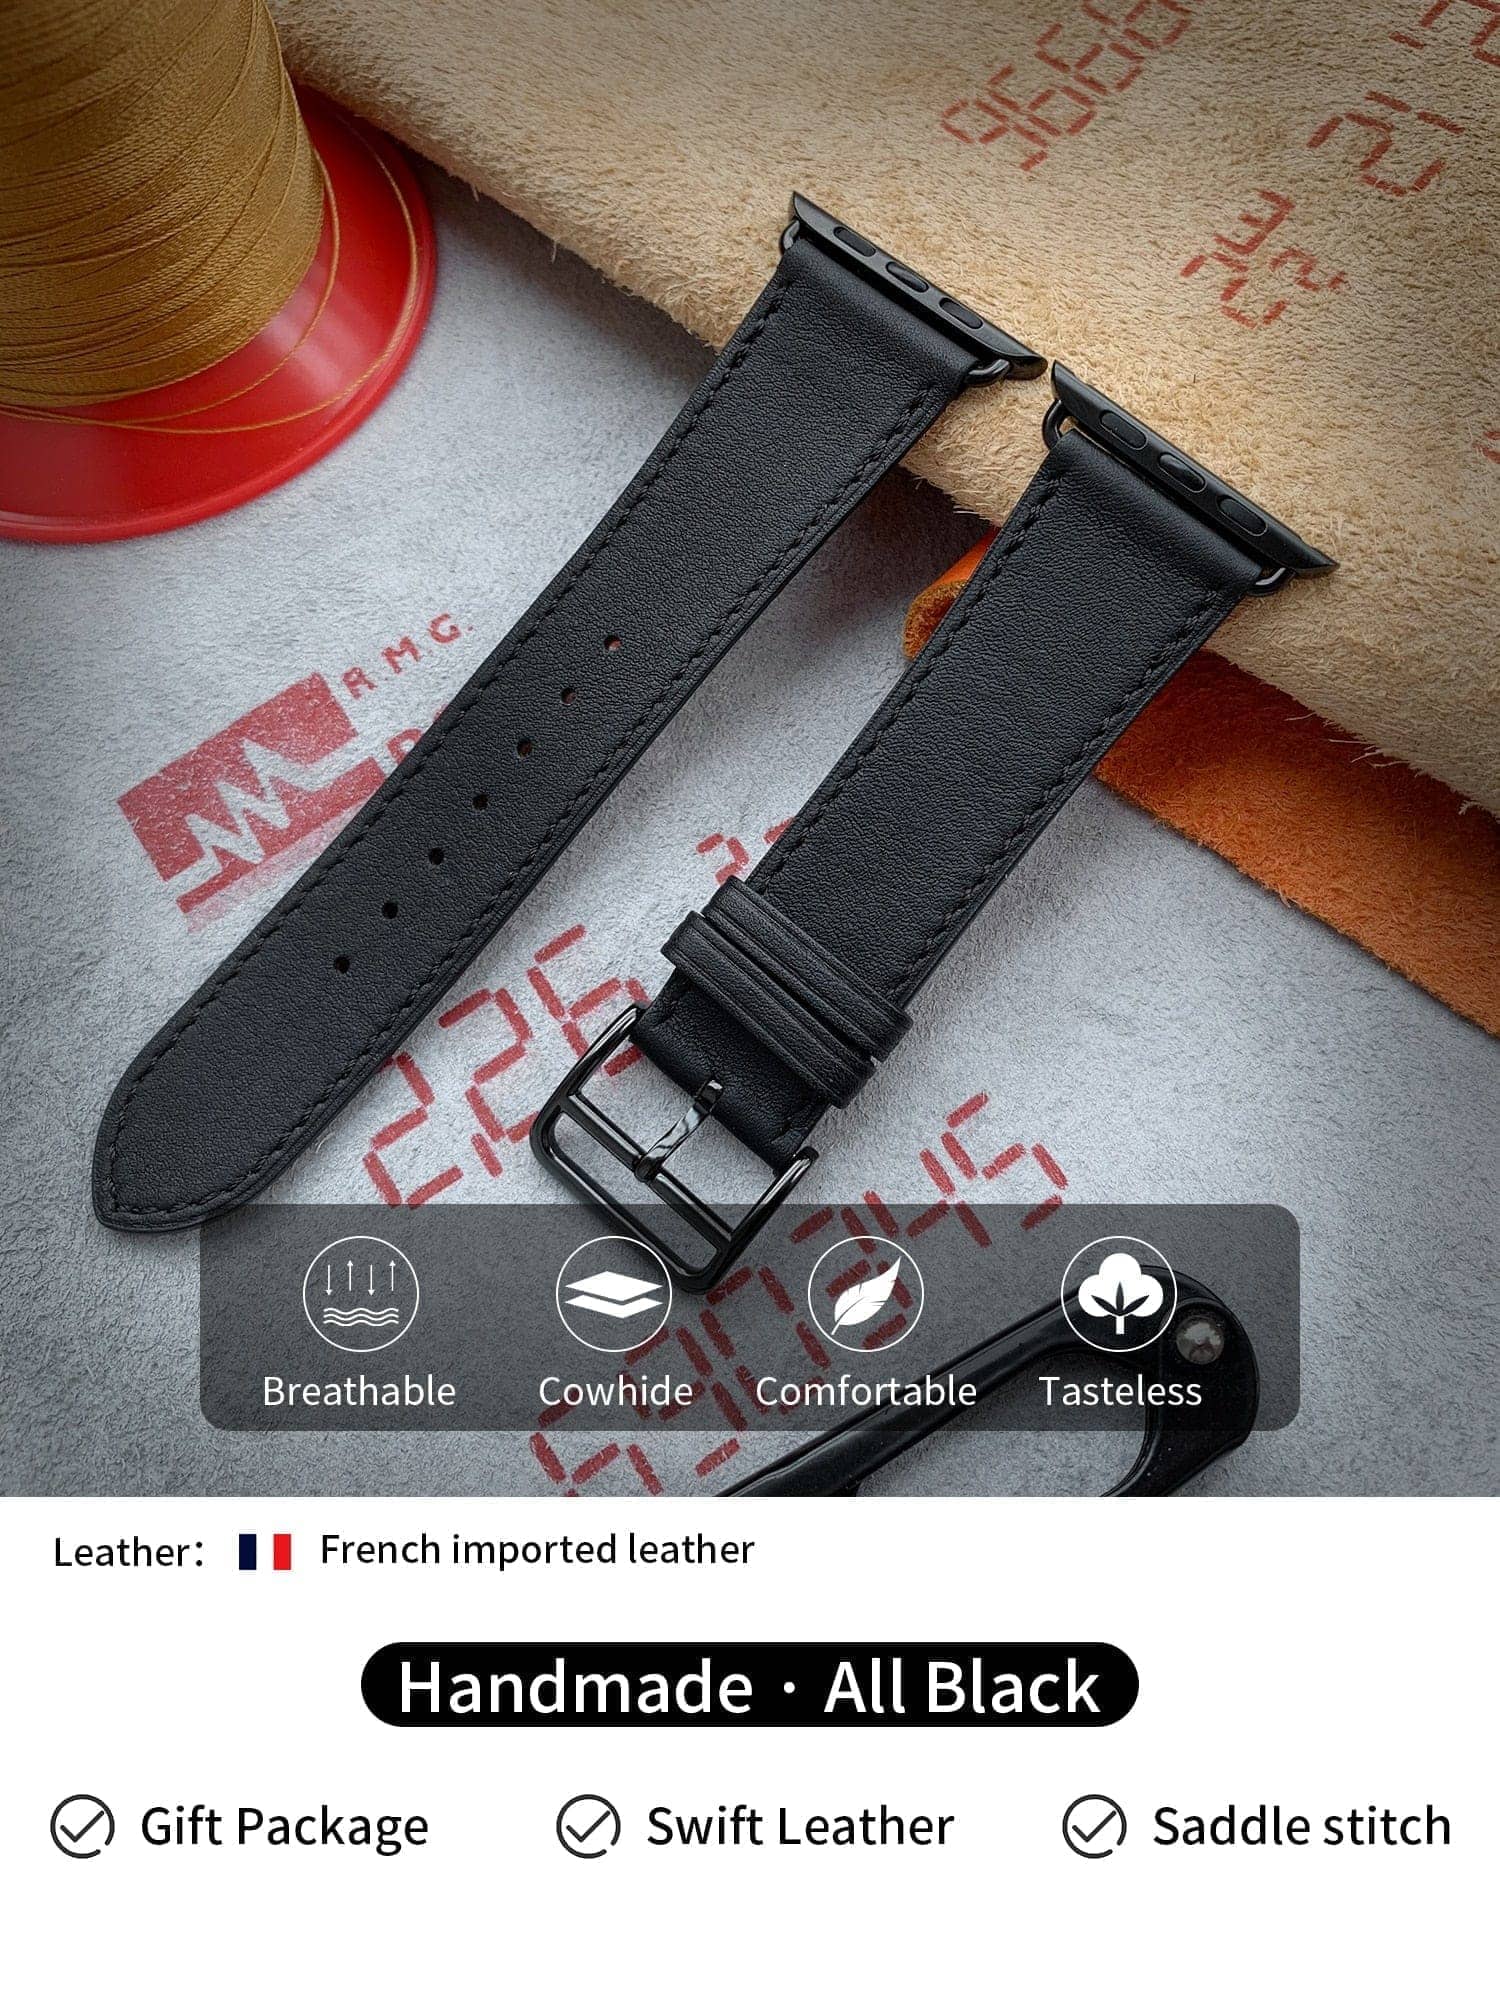 Hermes Watch Bands for Apple Watches - Infinity Loops